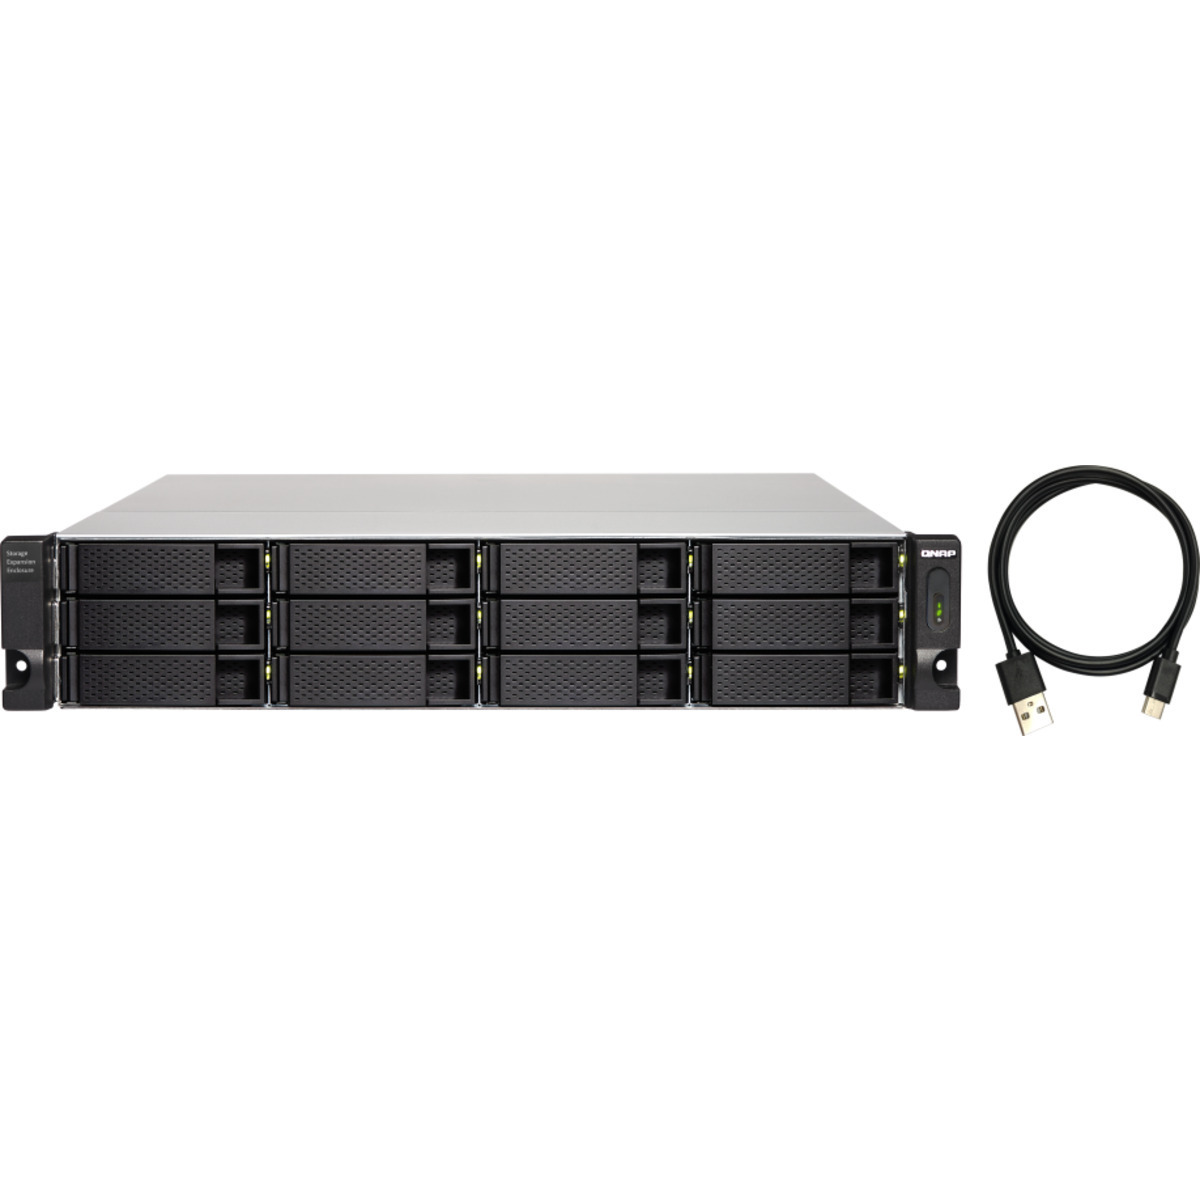 QNAP TL-R1200C-RP External Expansion Drive 18tb 12-Bay RackMount Multimedia / Power User / Business Expansion Enclosure 9x2tb Sandisk Ultra 3D SDSSDH3-2T00 2.5 560/520MB/s SATA 6Gb/s SSD CONSUMER Class Drives Installed - Burn-In Tested TL-R1200C-RP External Expansion Drive